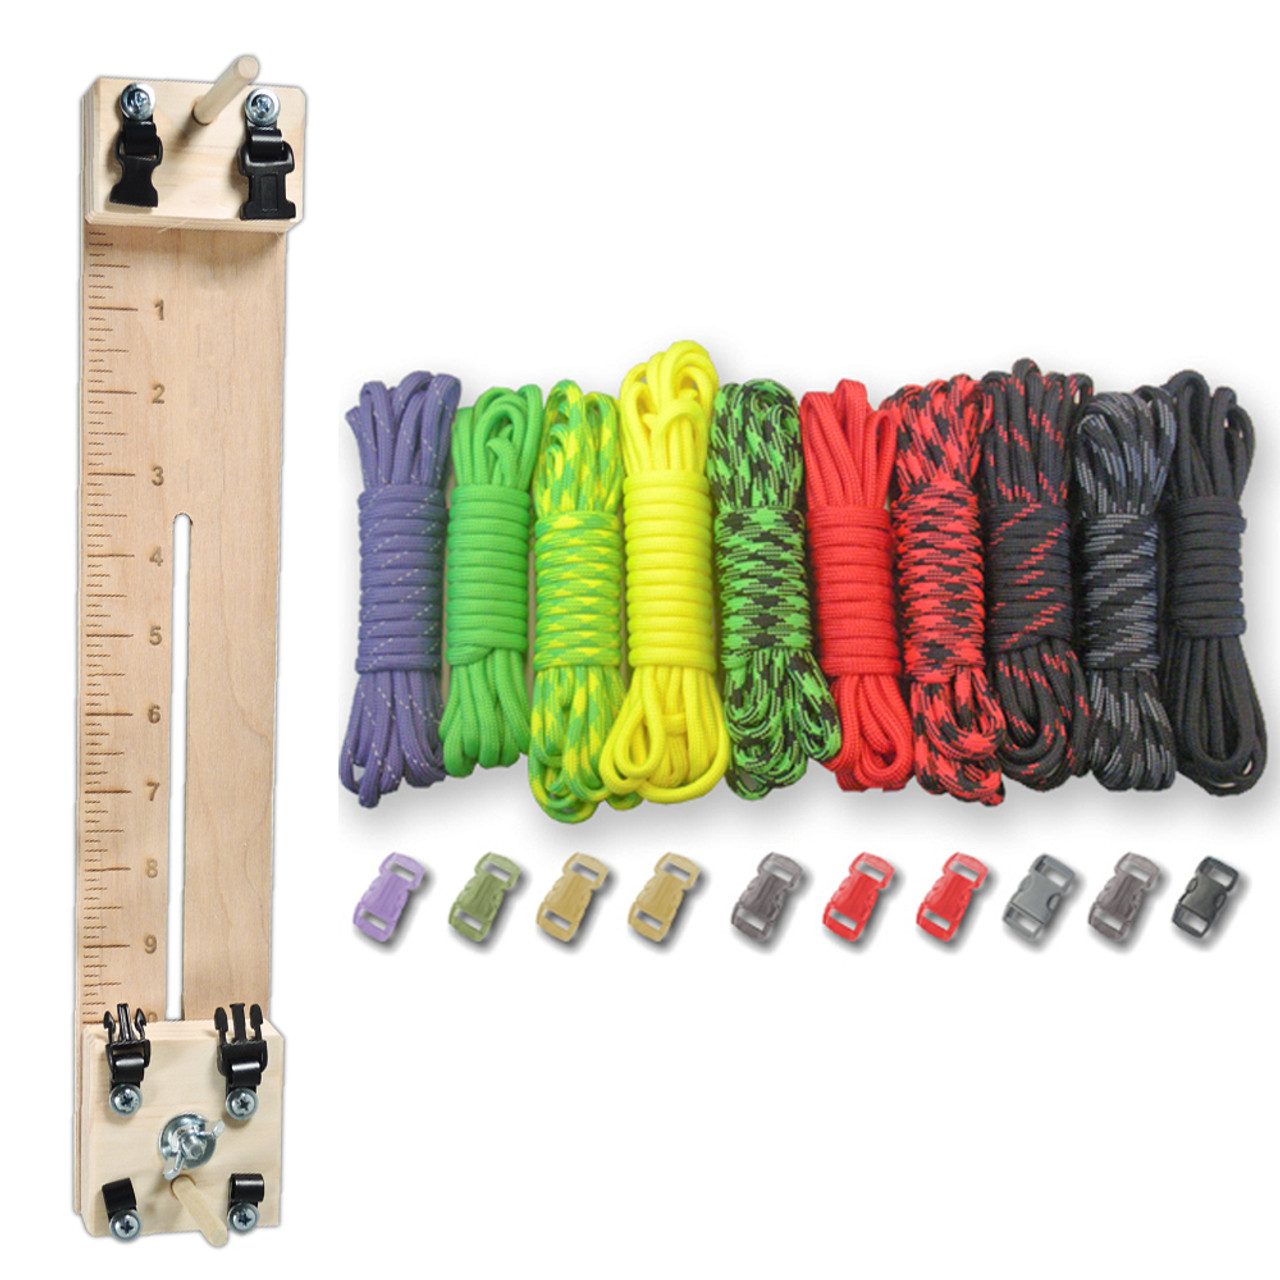 Paracord Kits  WestCoastParacord - Low Prices, High Quality